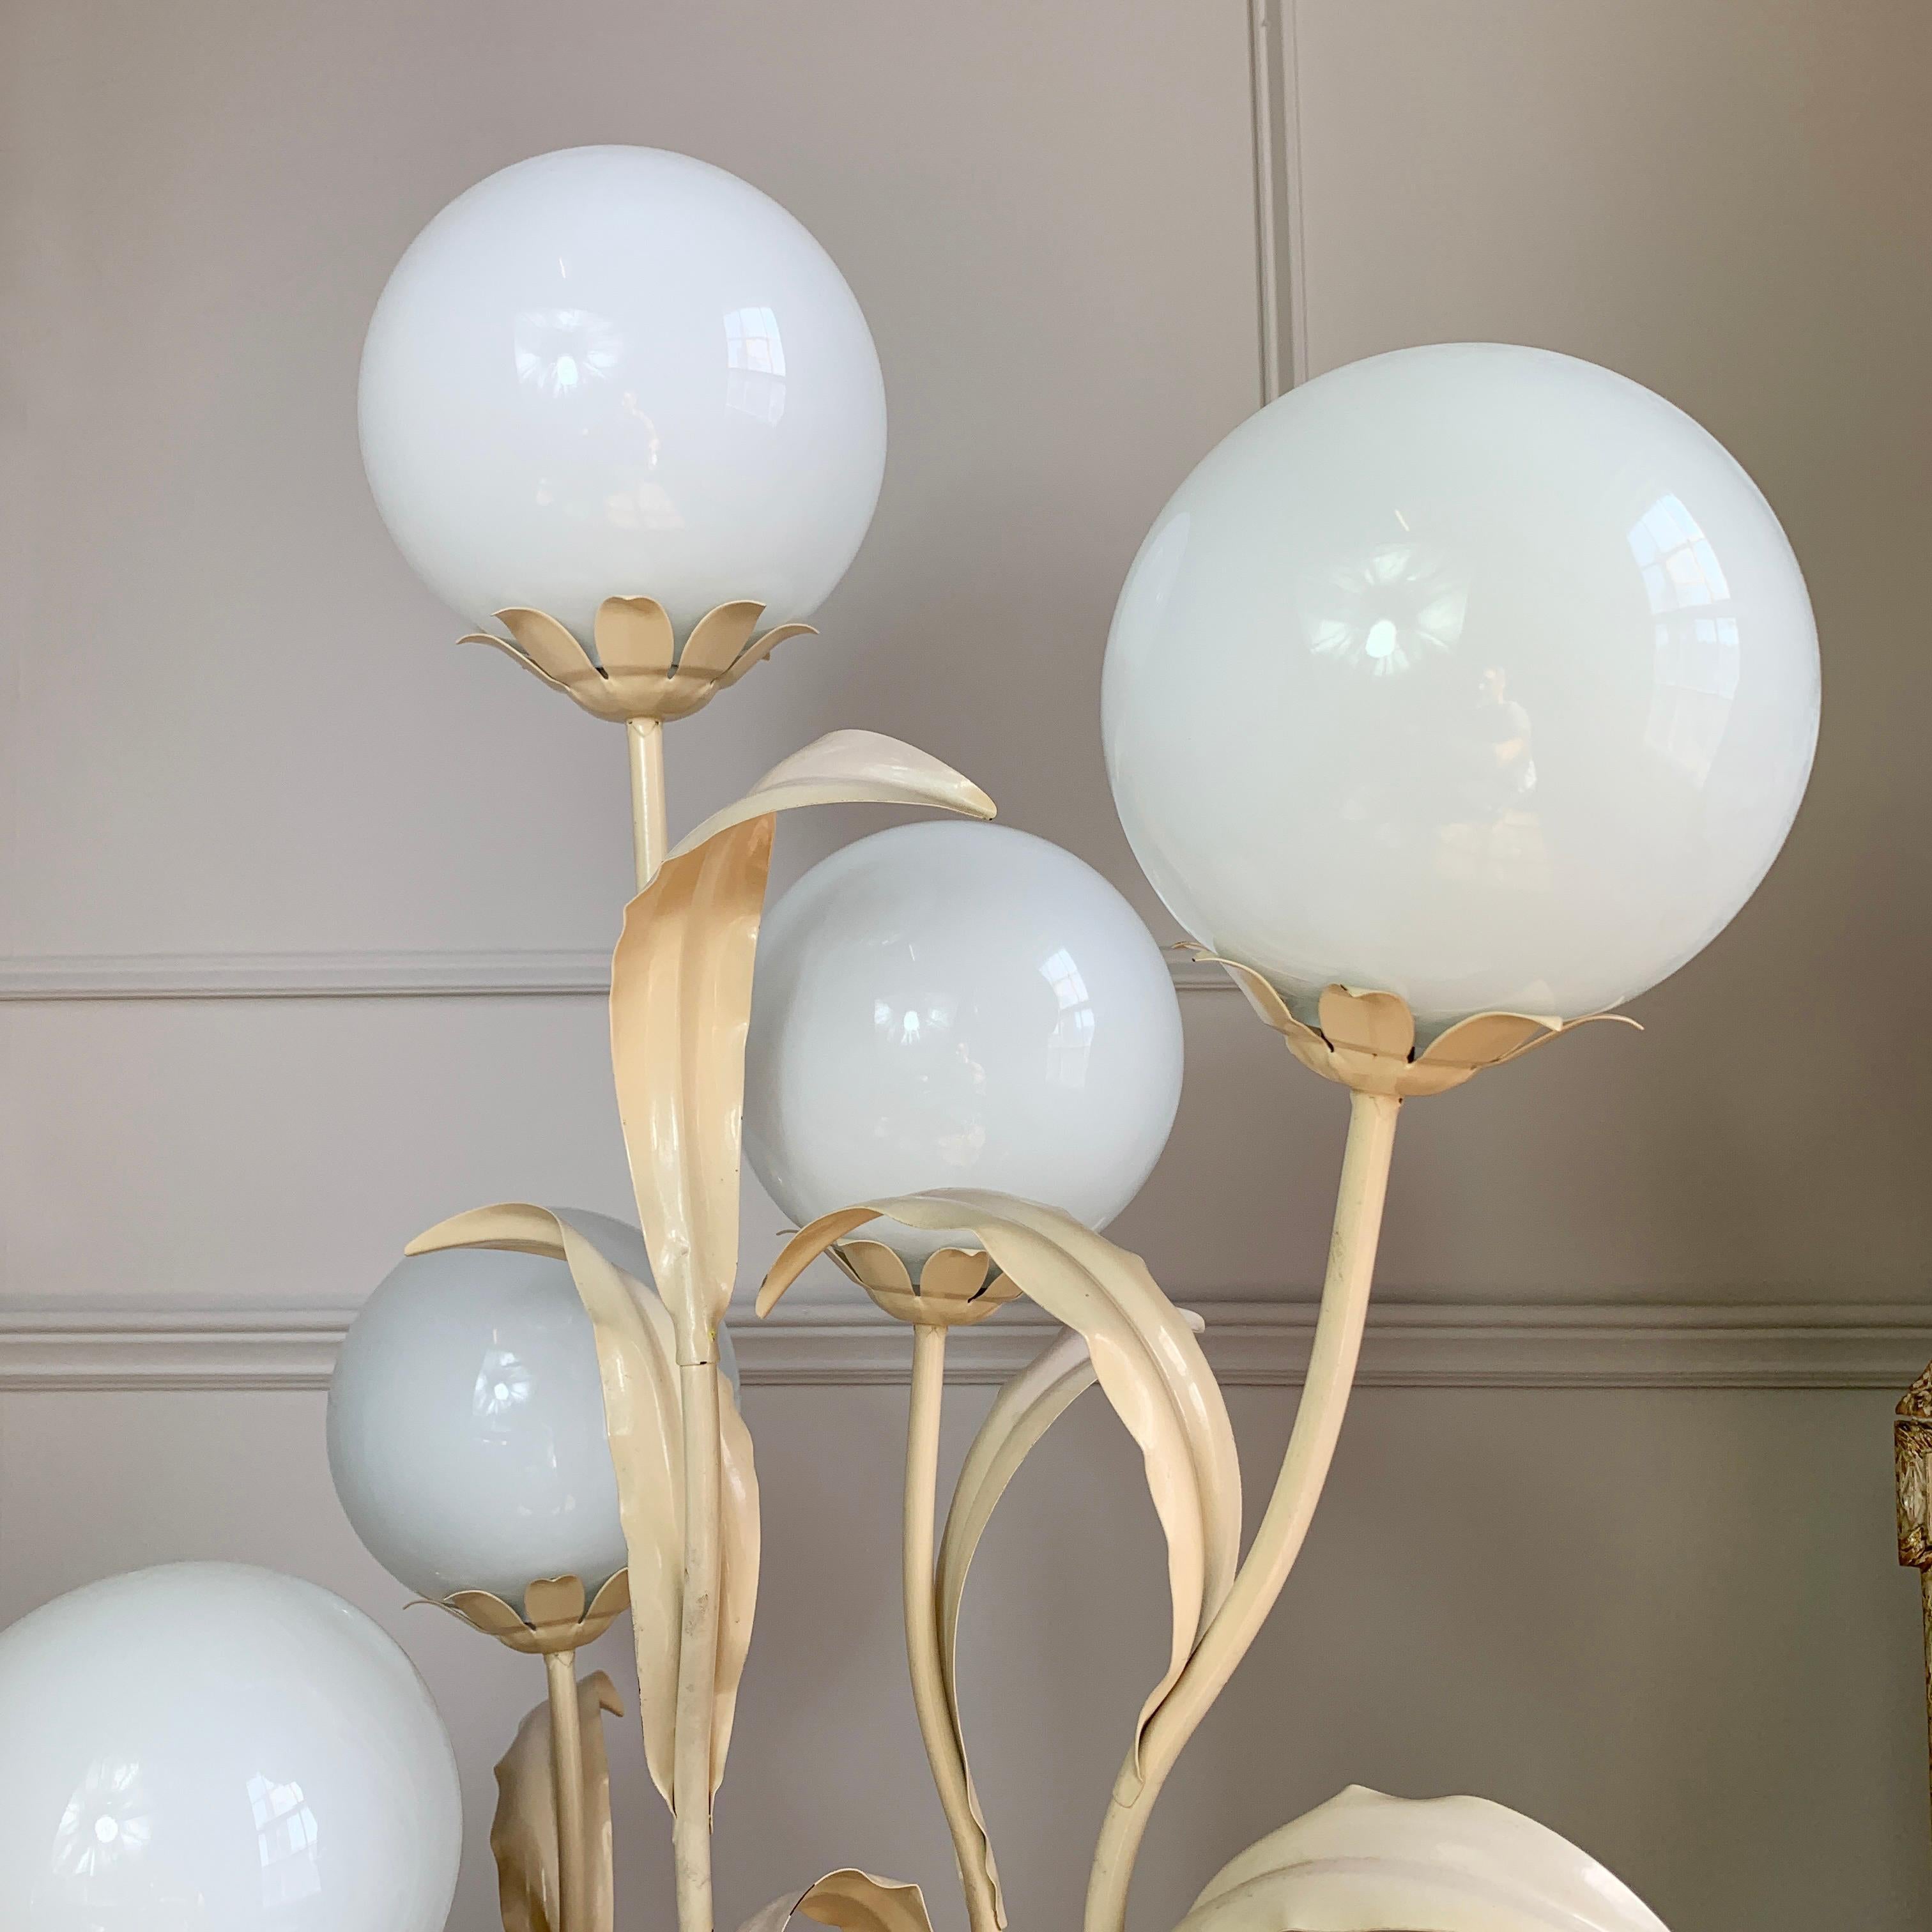 This is an exceptionally pretty floor lamp by Hans Kogl, the tall foliage design is set against 6 opaque glass globe covered light fittings. The white enamelled finish gives the piece a very attractive appearance on or off. The entire light is